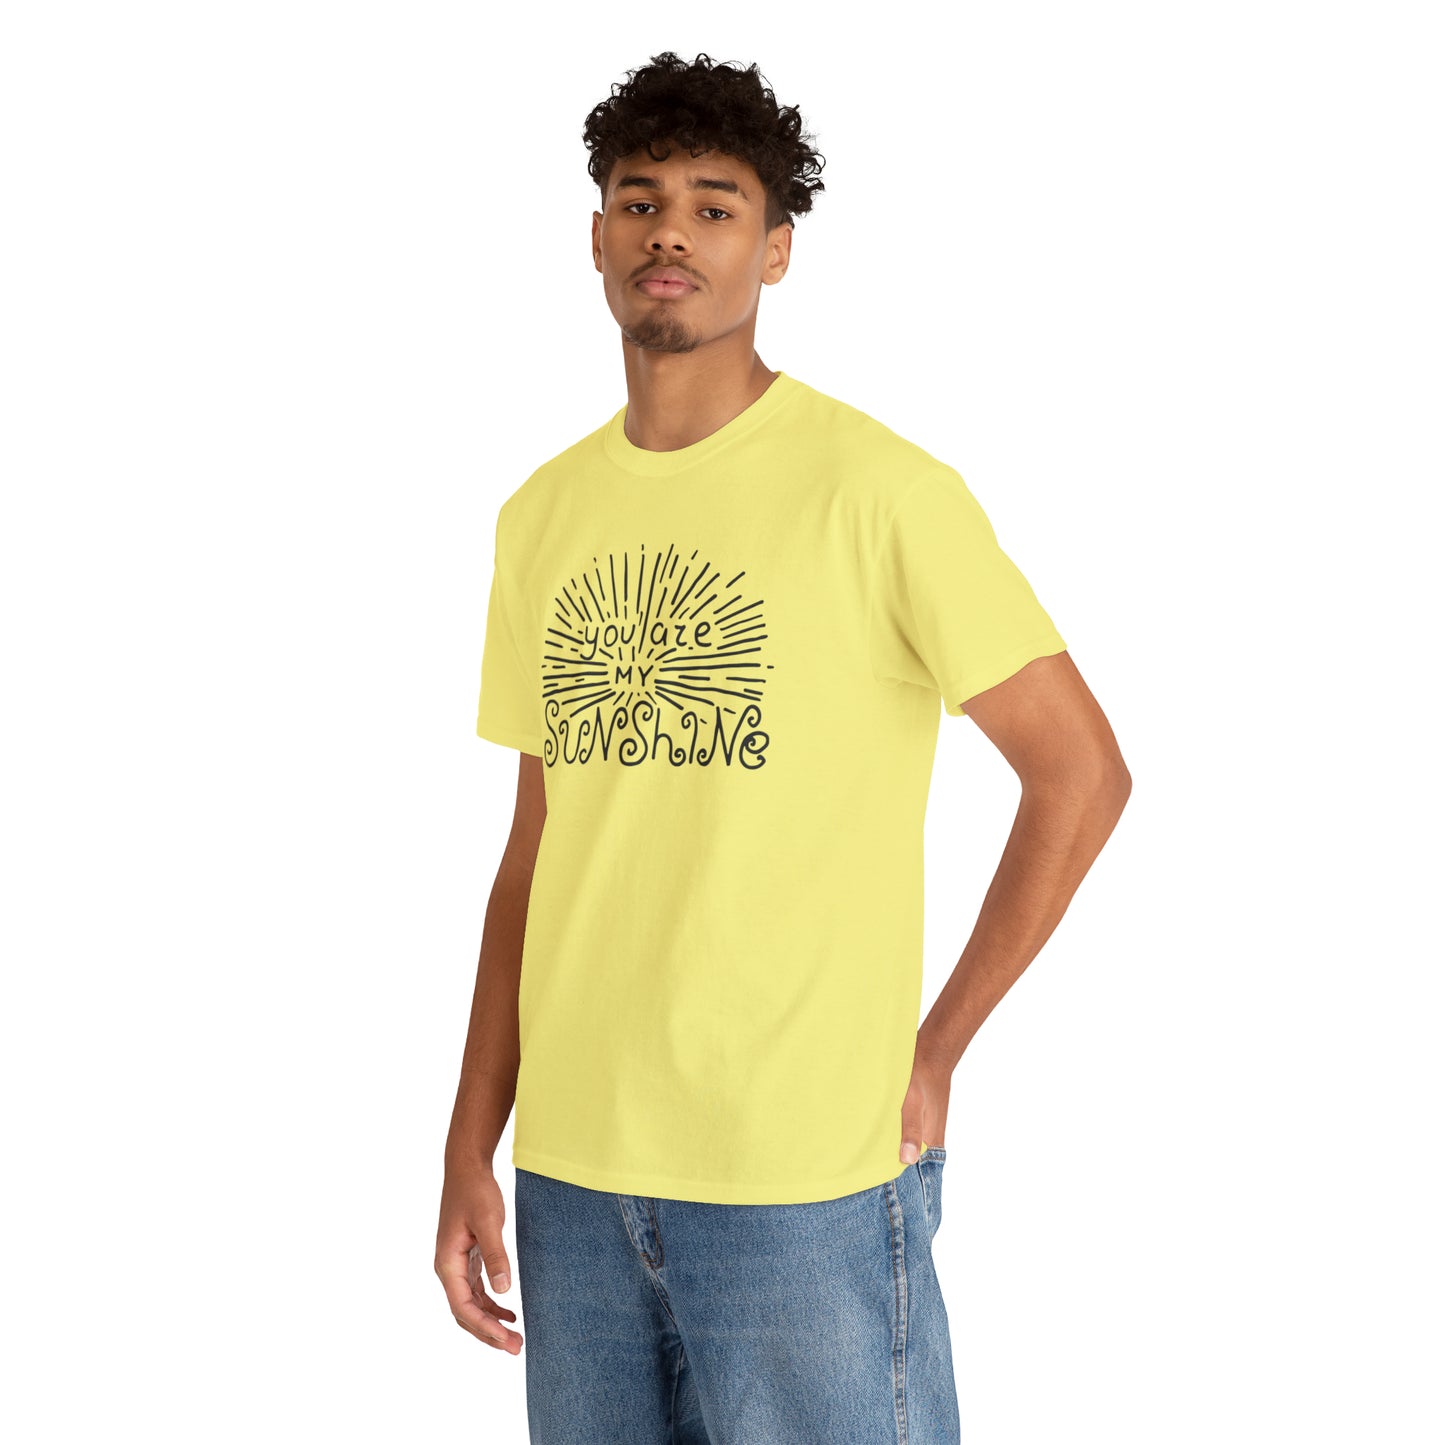 You Are My Sunshine T-Shirt Gift